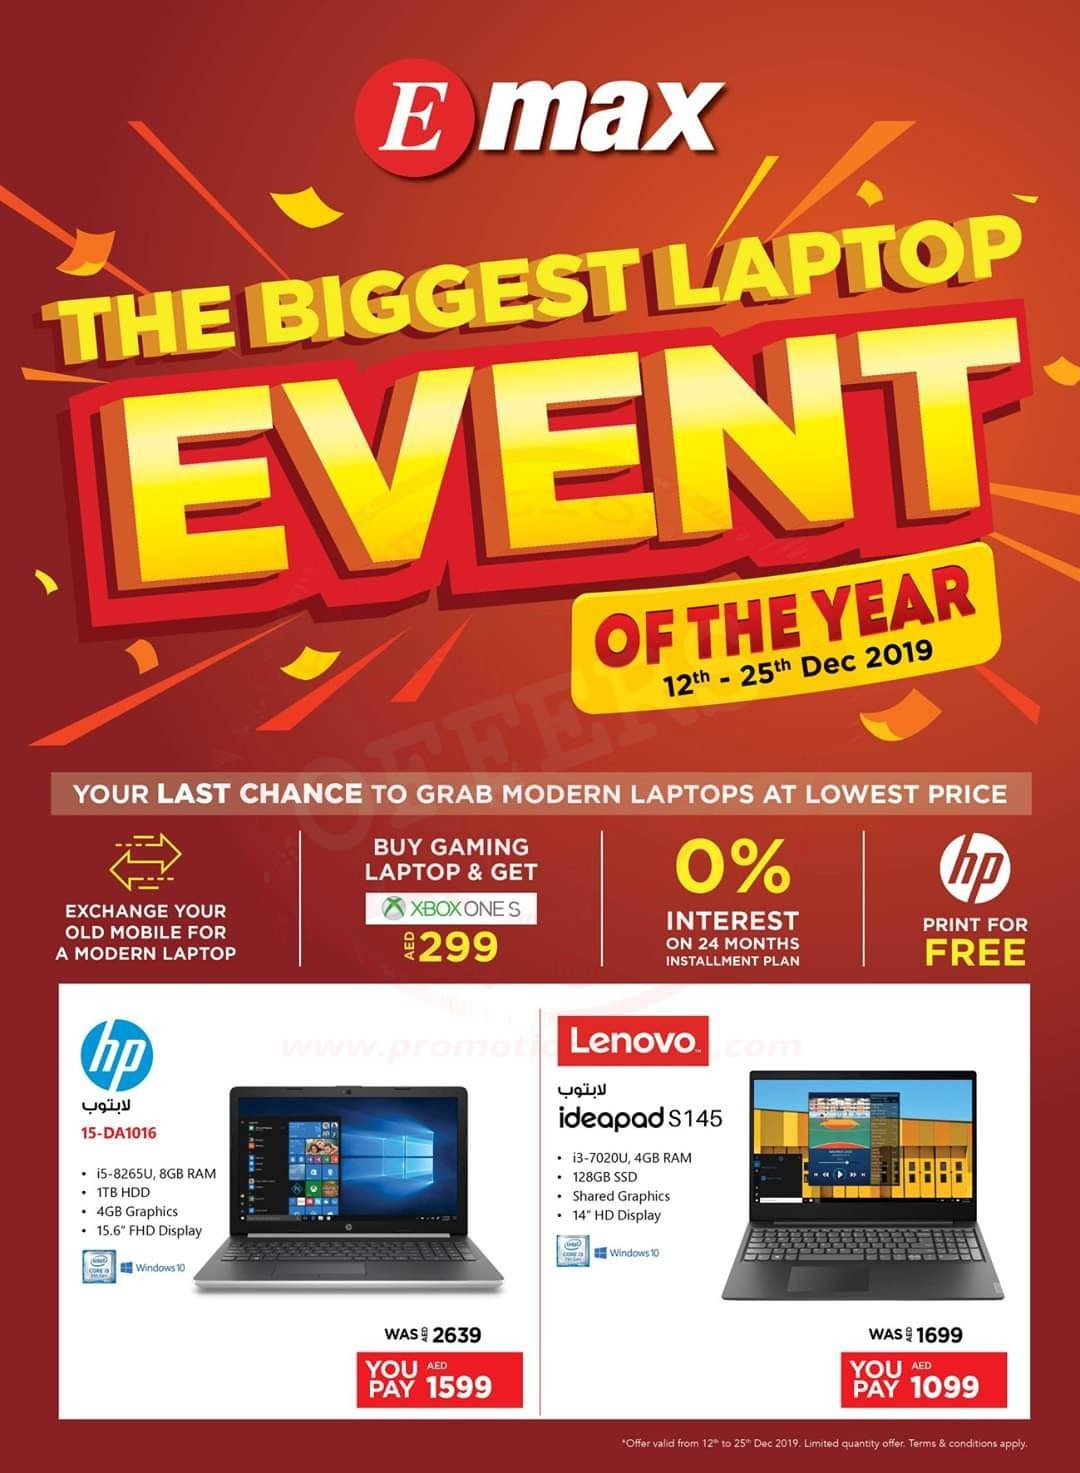 FB IMG 1576231730502 Biggest Laptop Event Of The Year 2019 at Emax